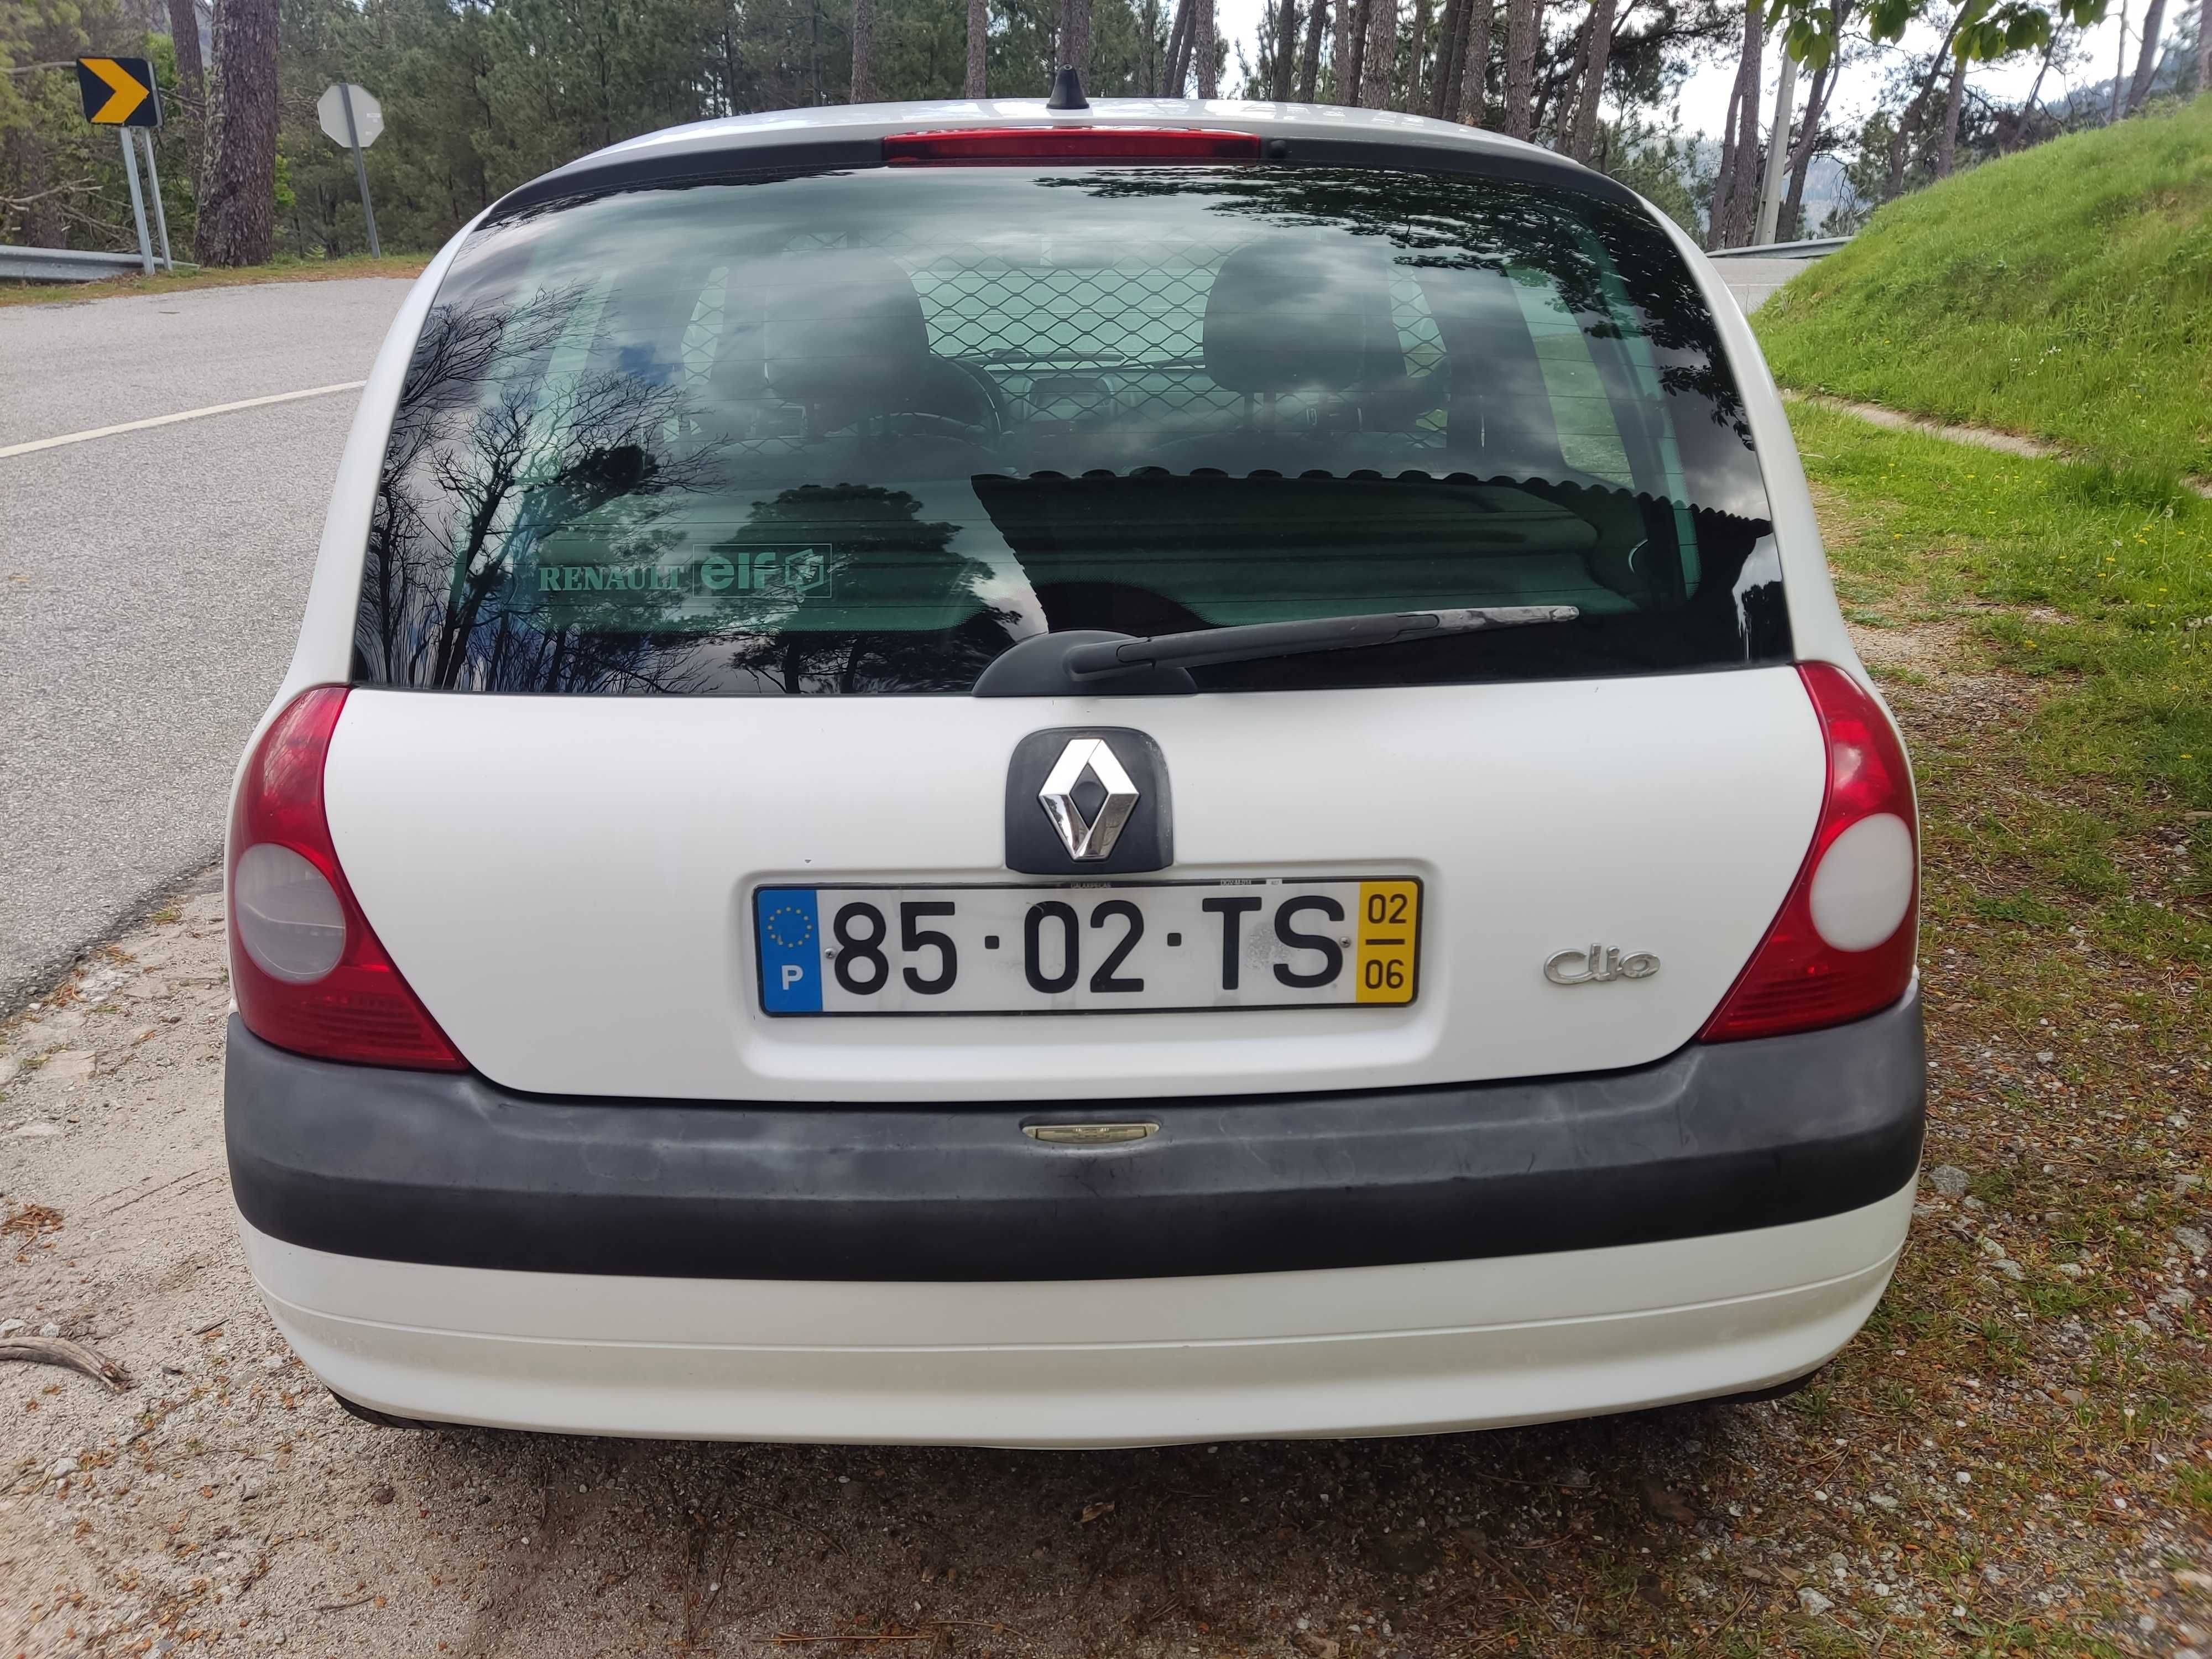 Renault Clio, 1.5dci (173 mil kms)